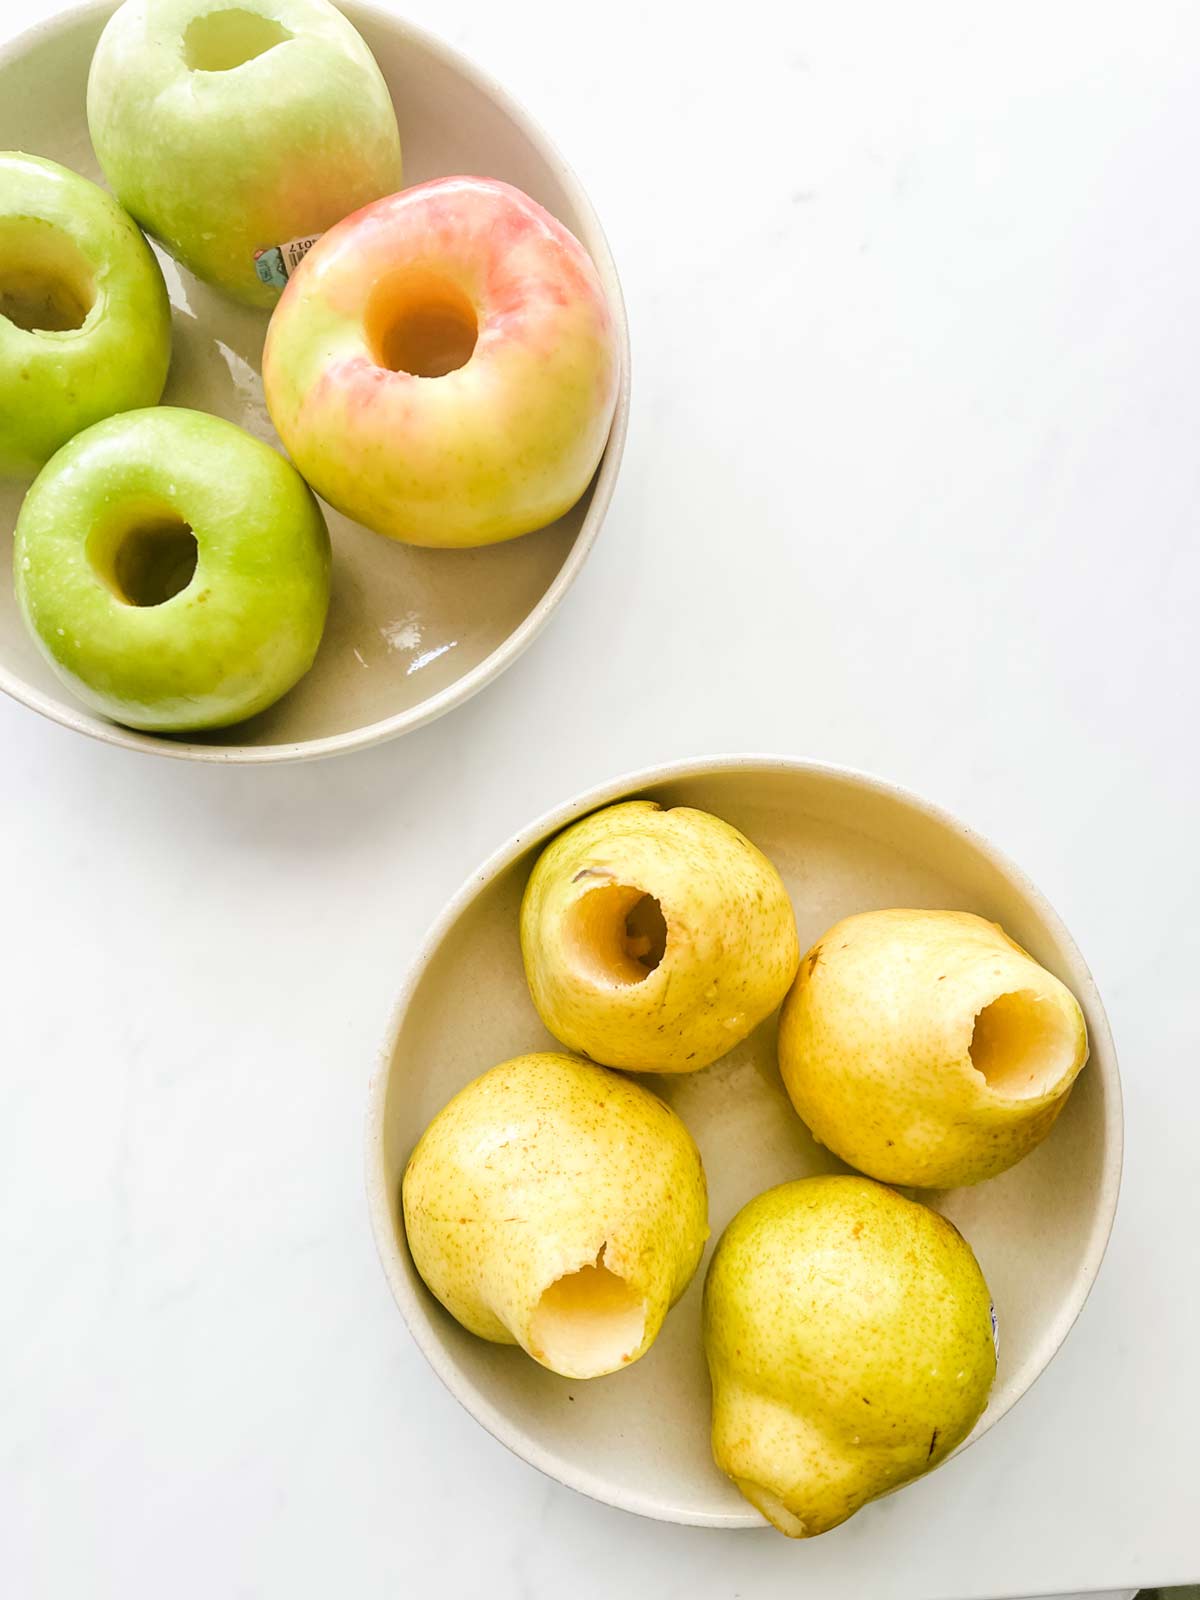 Overhead photo of a bowl of cored apples and a bowl of cored pears.